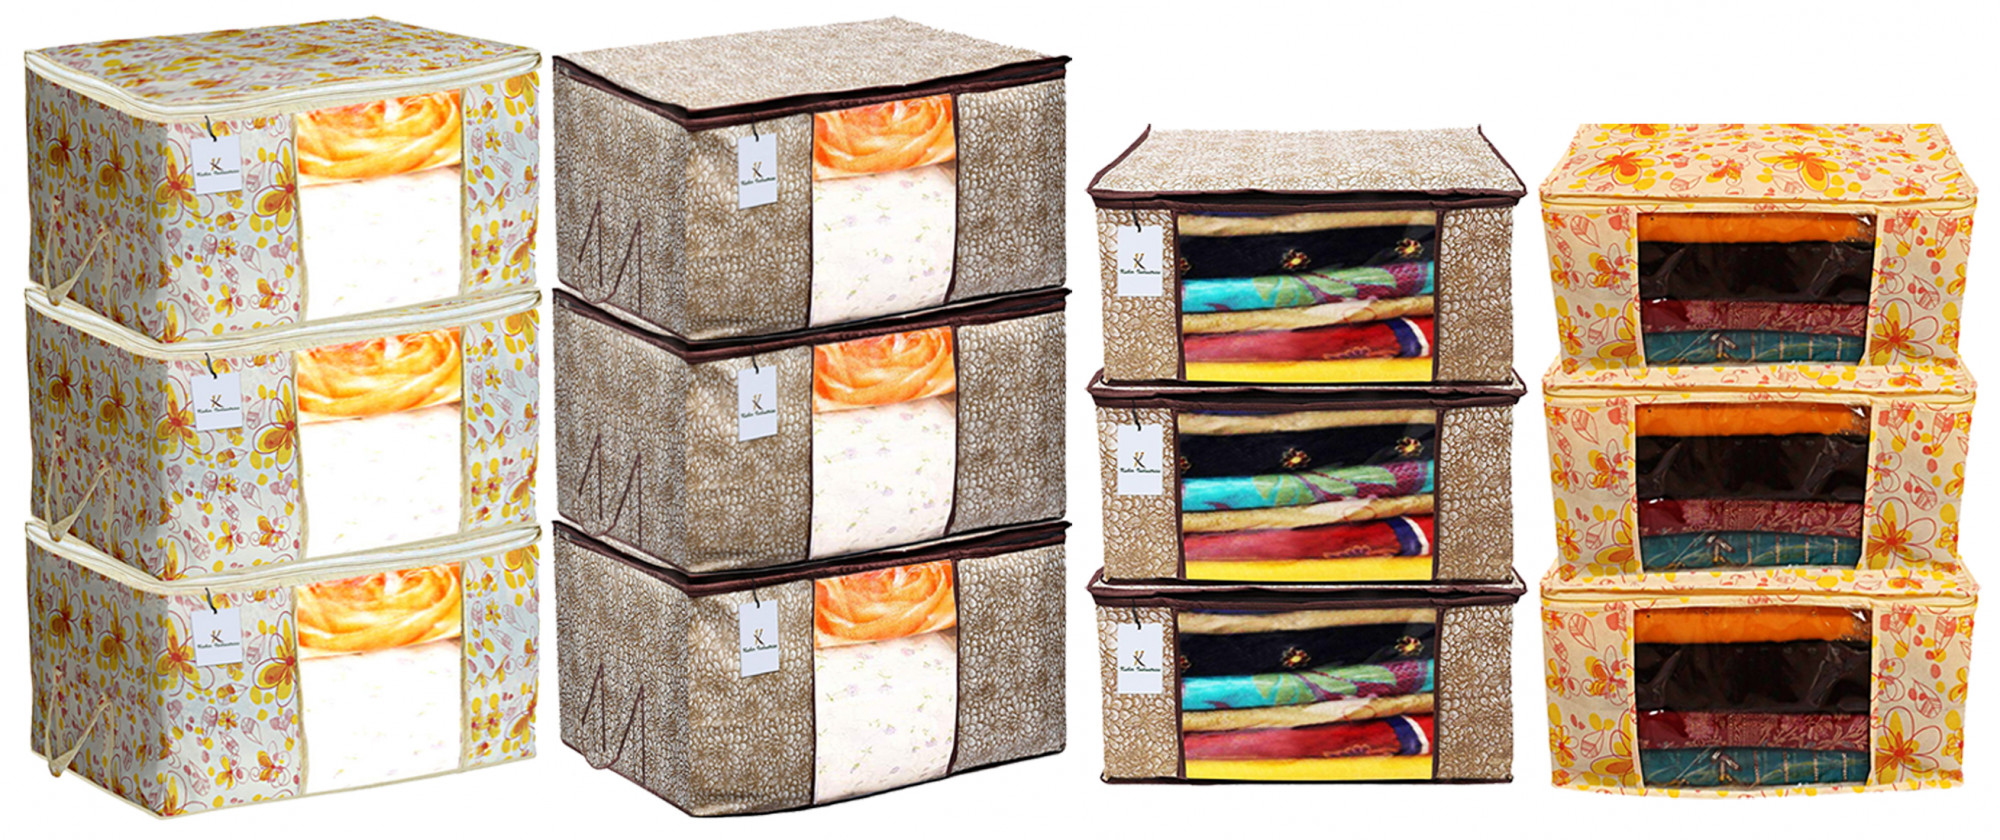 Kuber Industries Metalic Printed Non Woven Saree Cover And Underbed Storage Bag, Storage Organiser, Blanket Cover, Ivory Red & Golden Brown  -CTKTC42375